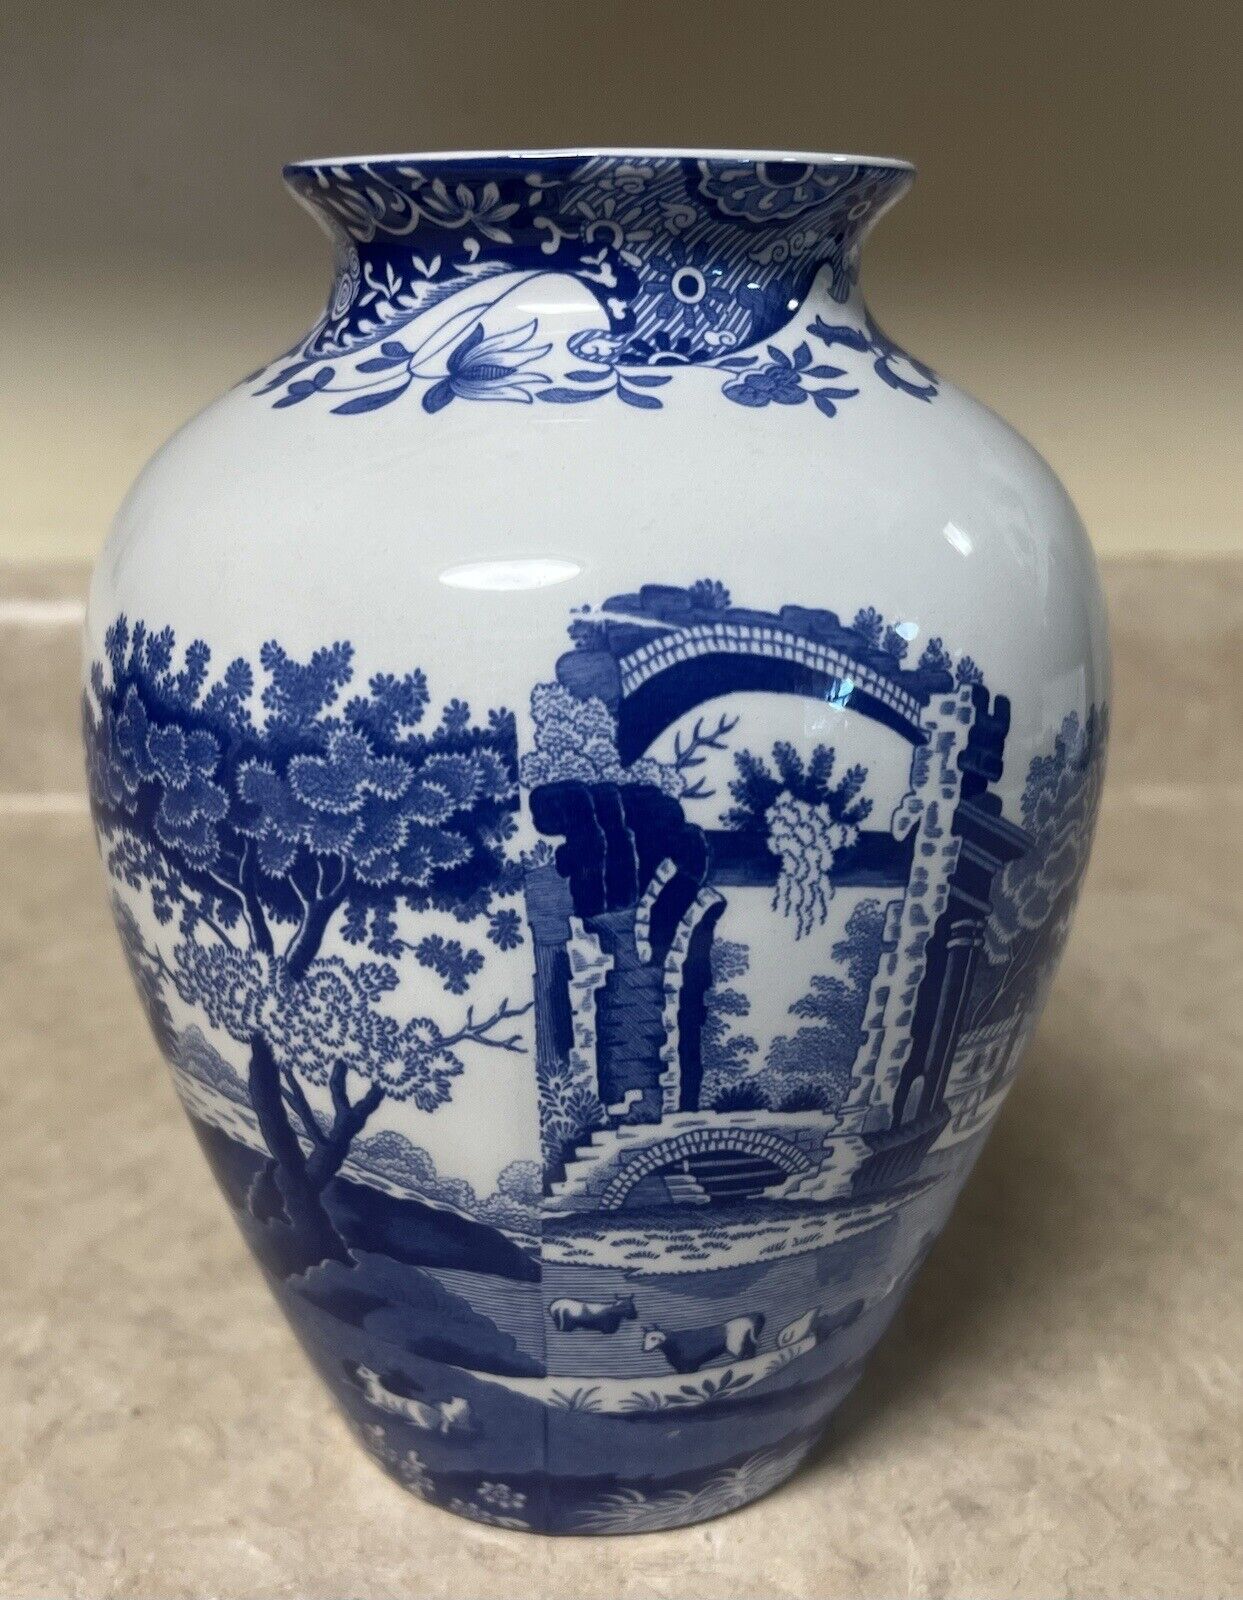 SPODE DESIGN  BLUE ITALIAN VASE 7.5 inches MADE IN ENGLAND Excellent Condition